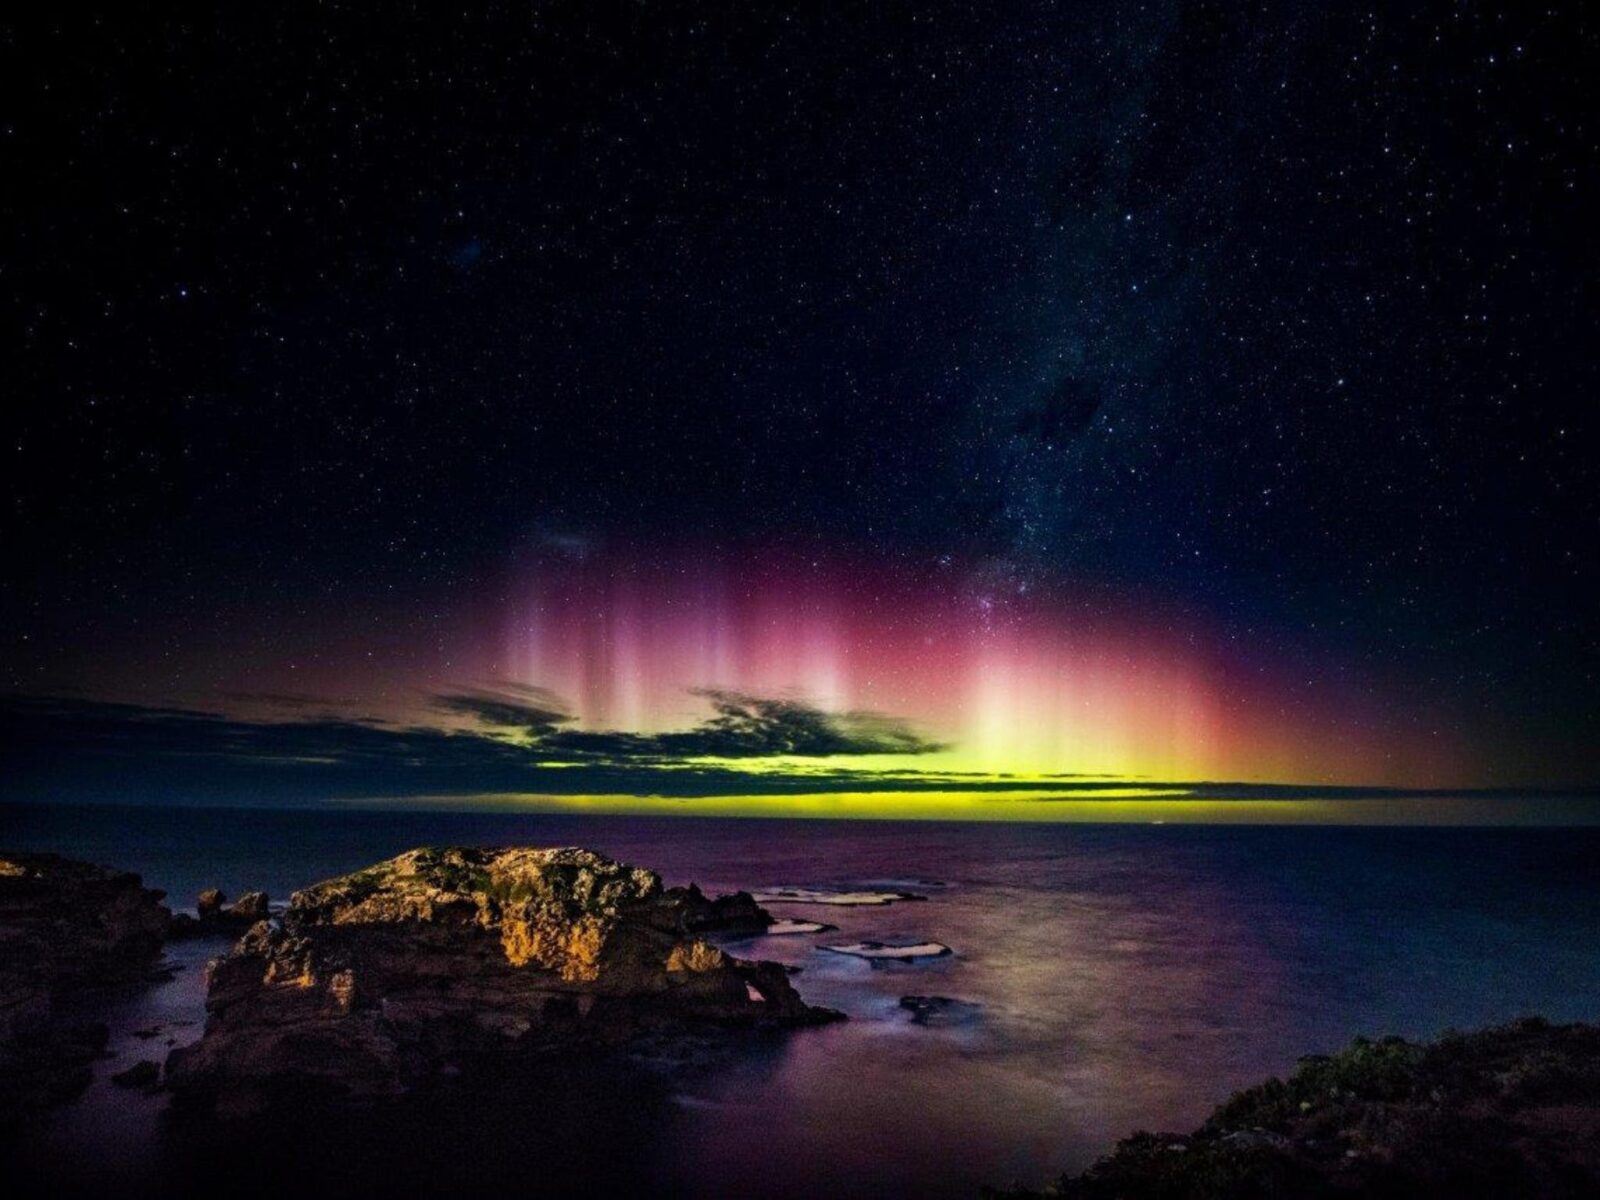 Cape Northumberland Port MacDonnell Southern lights